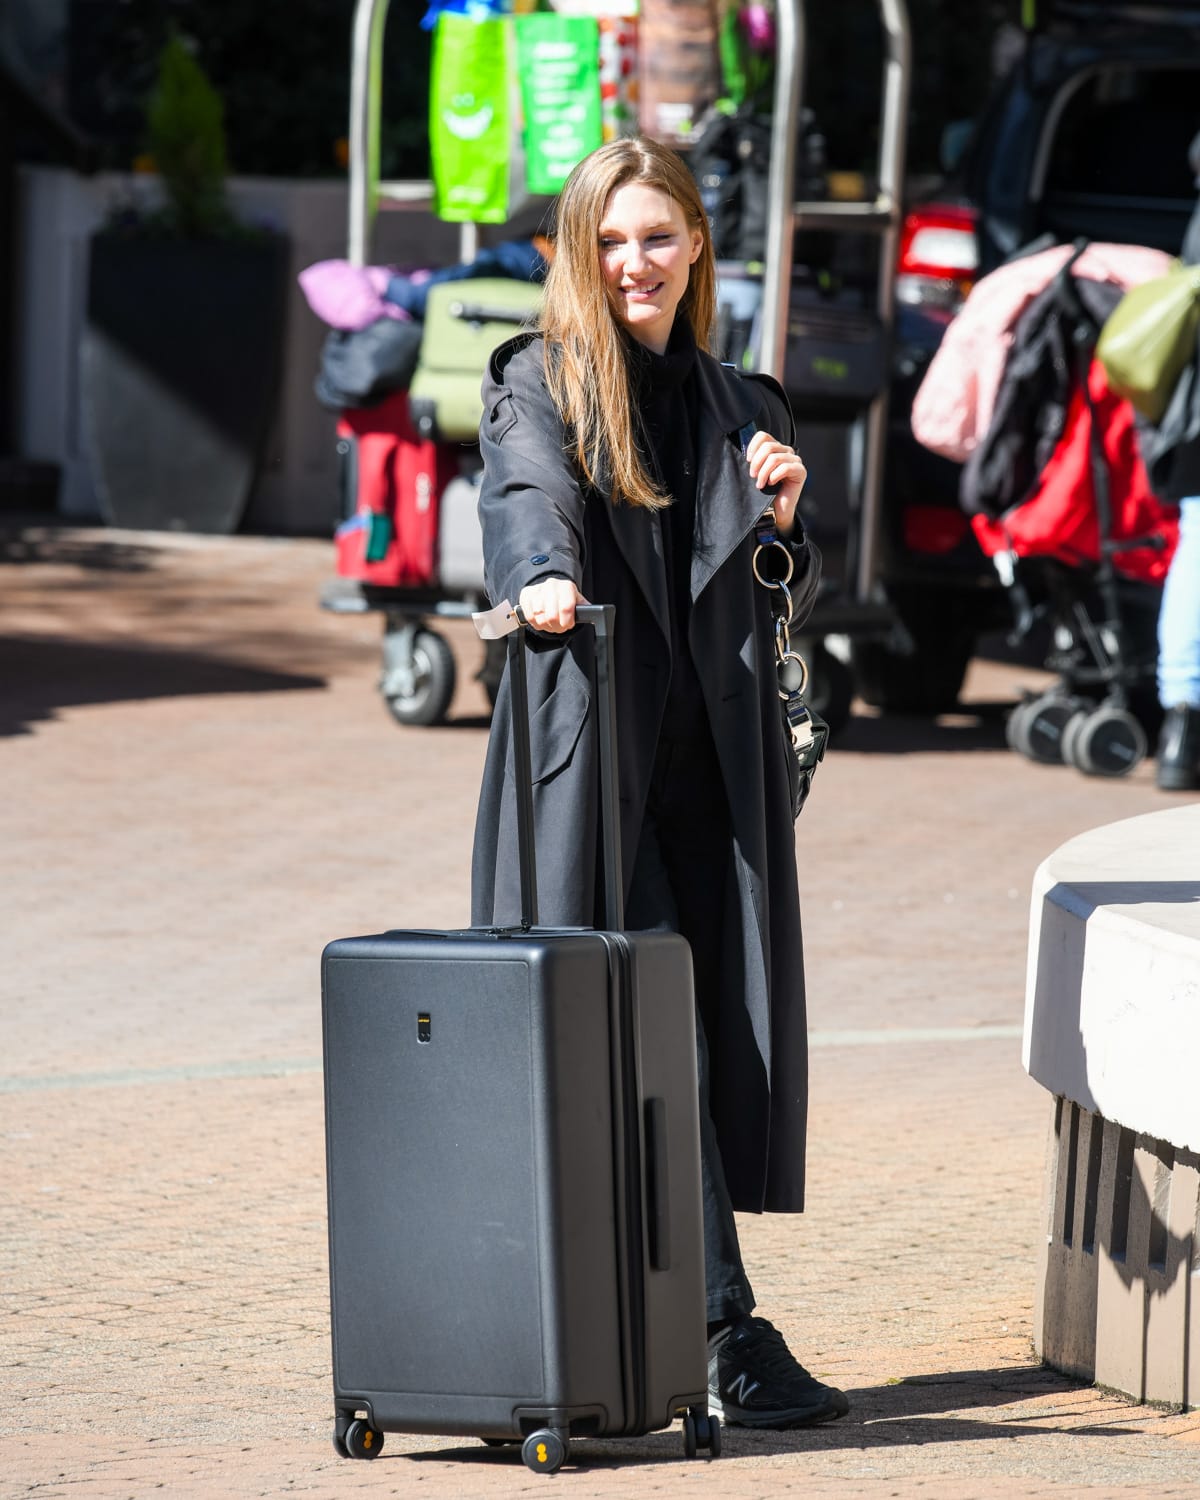 LEVEL8 Luggage Review - Standout Features & Considerations